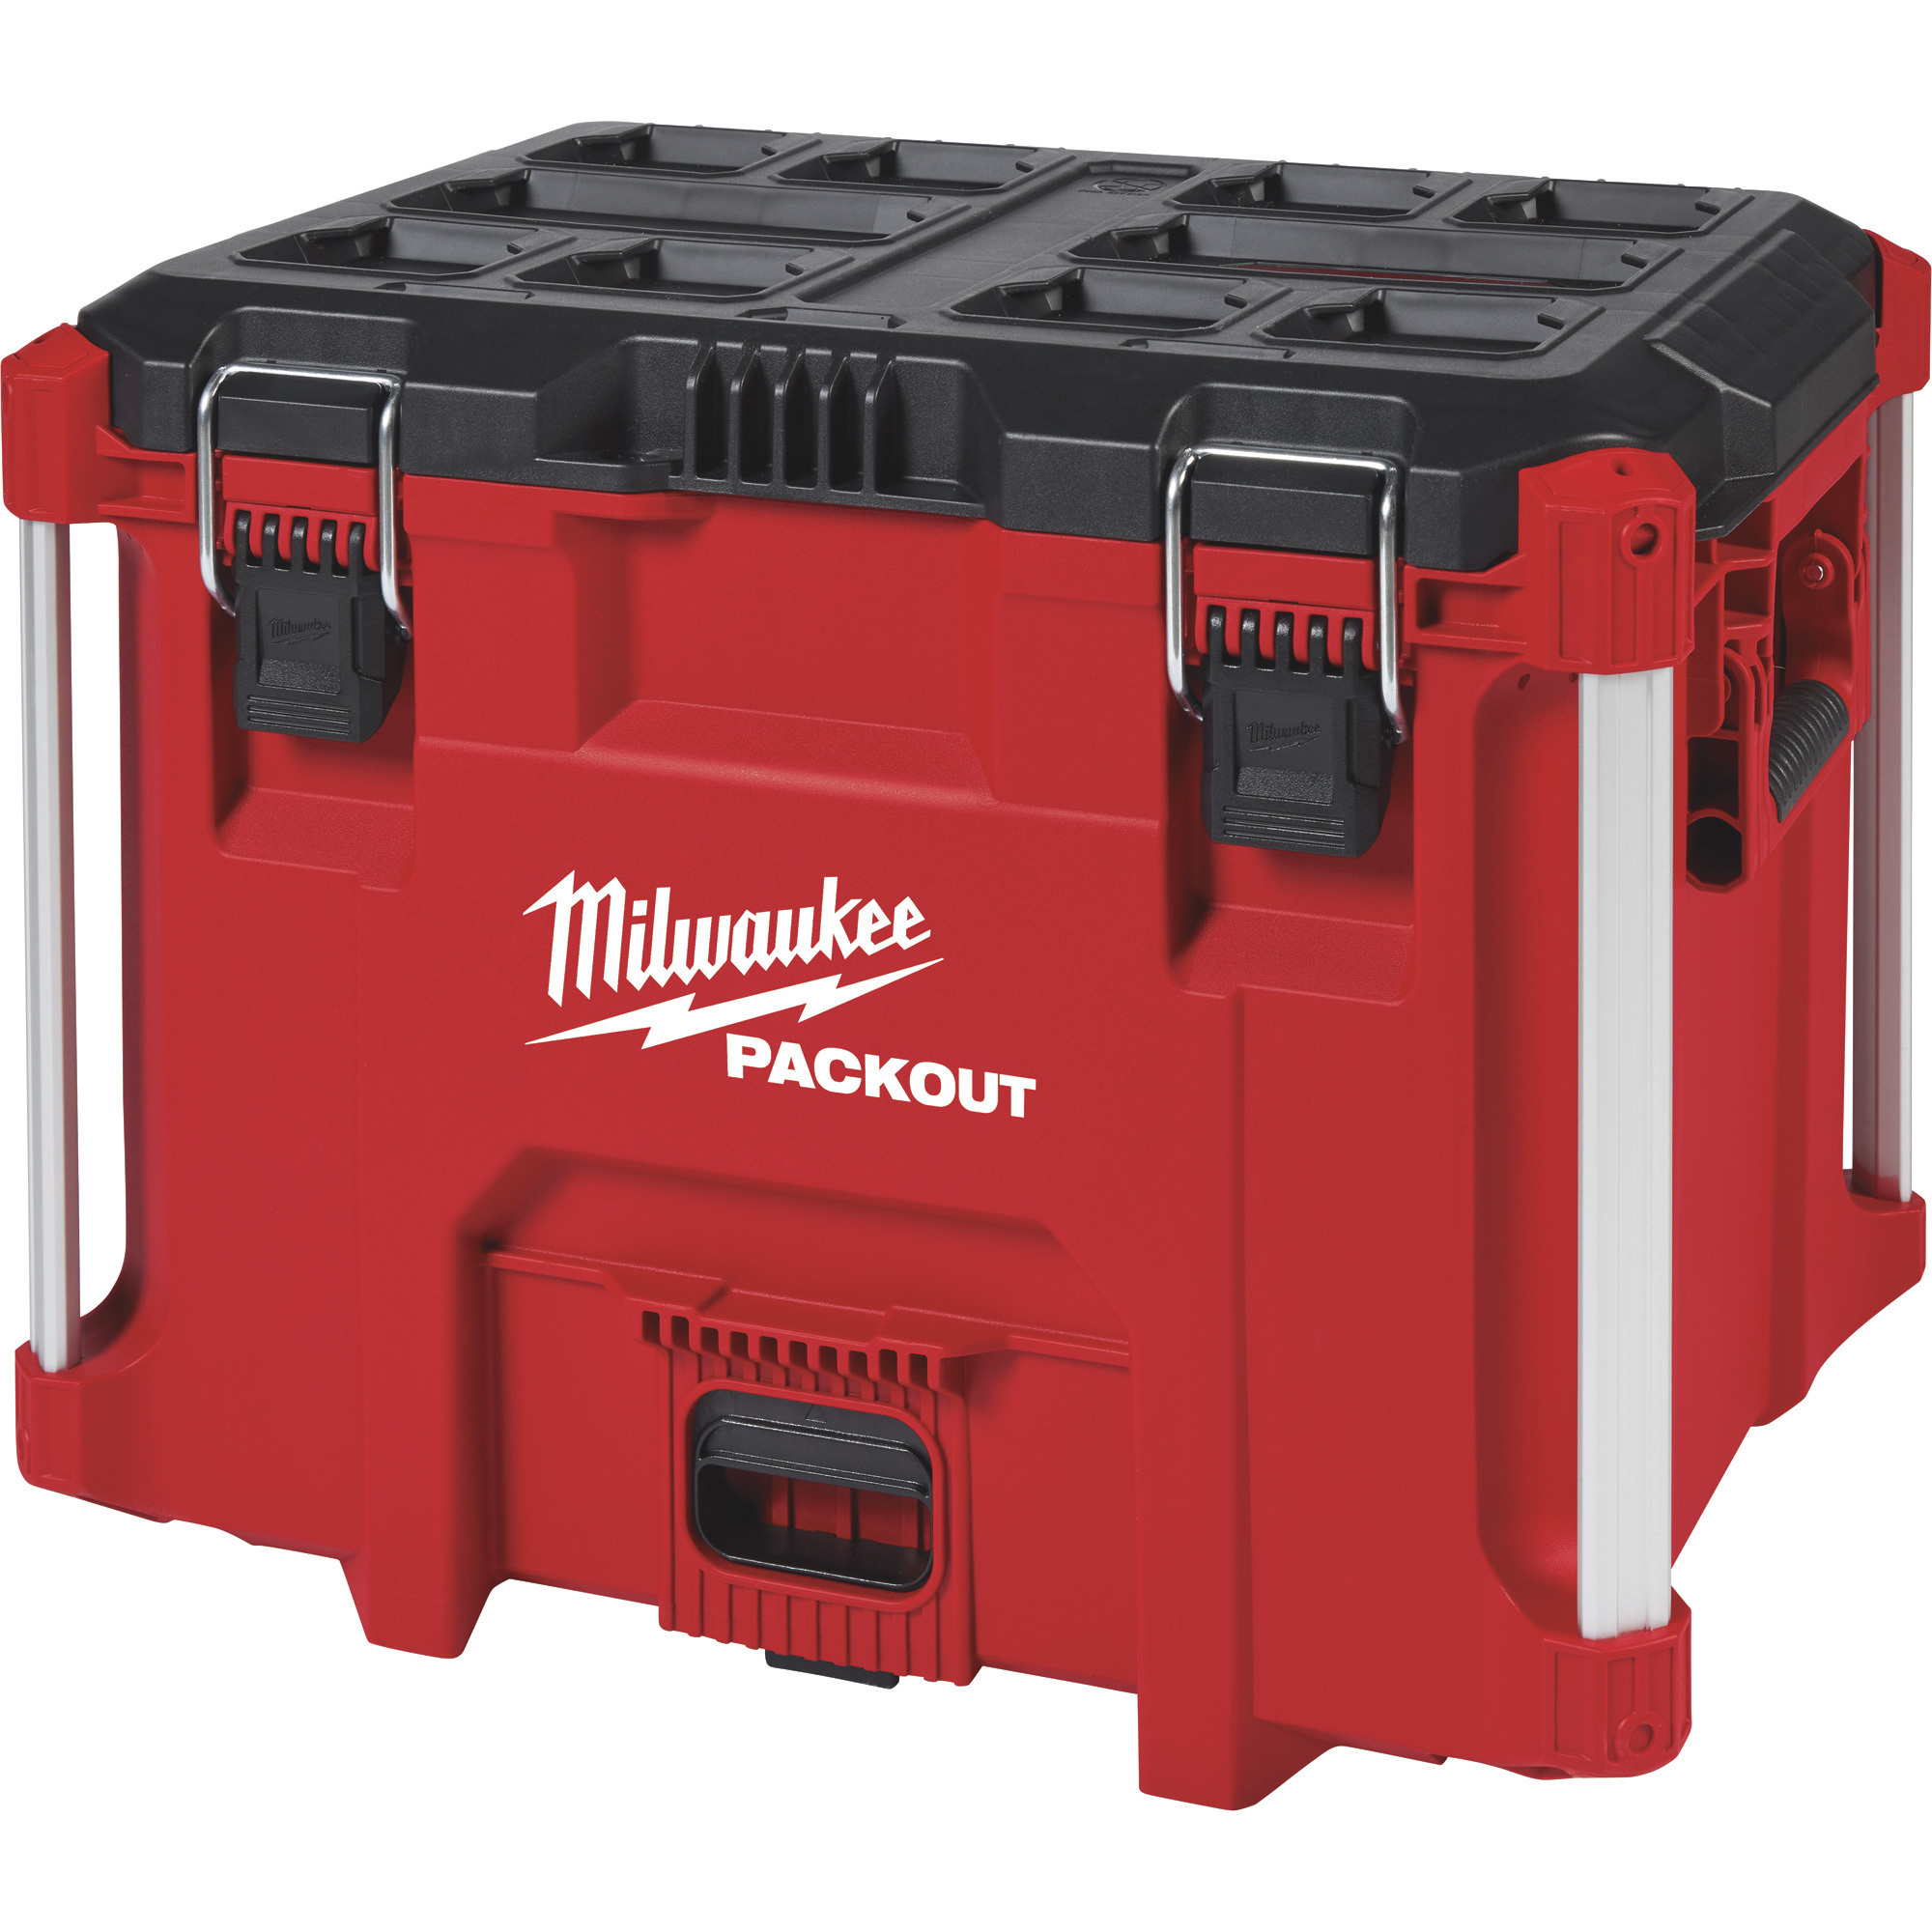 Milwaukee Packout X-Large Tool Box, 16 1/4Inch L x 22Inch W x 17Inch H, Model 48-22-8429